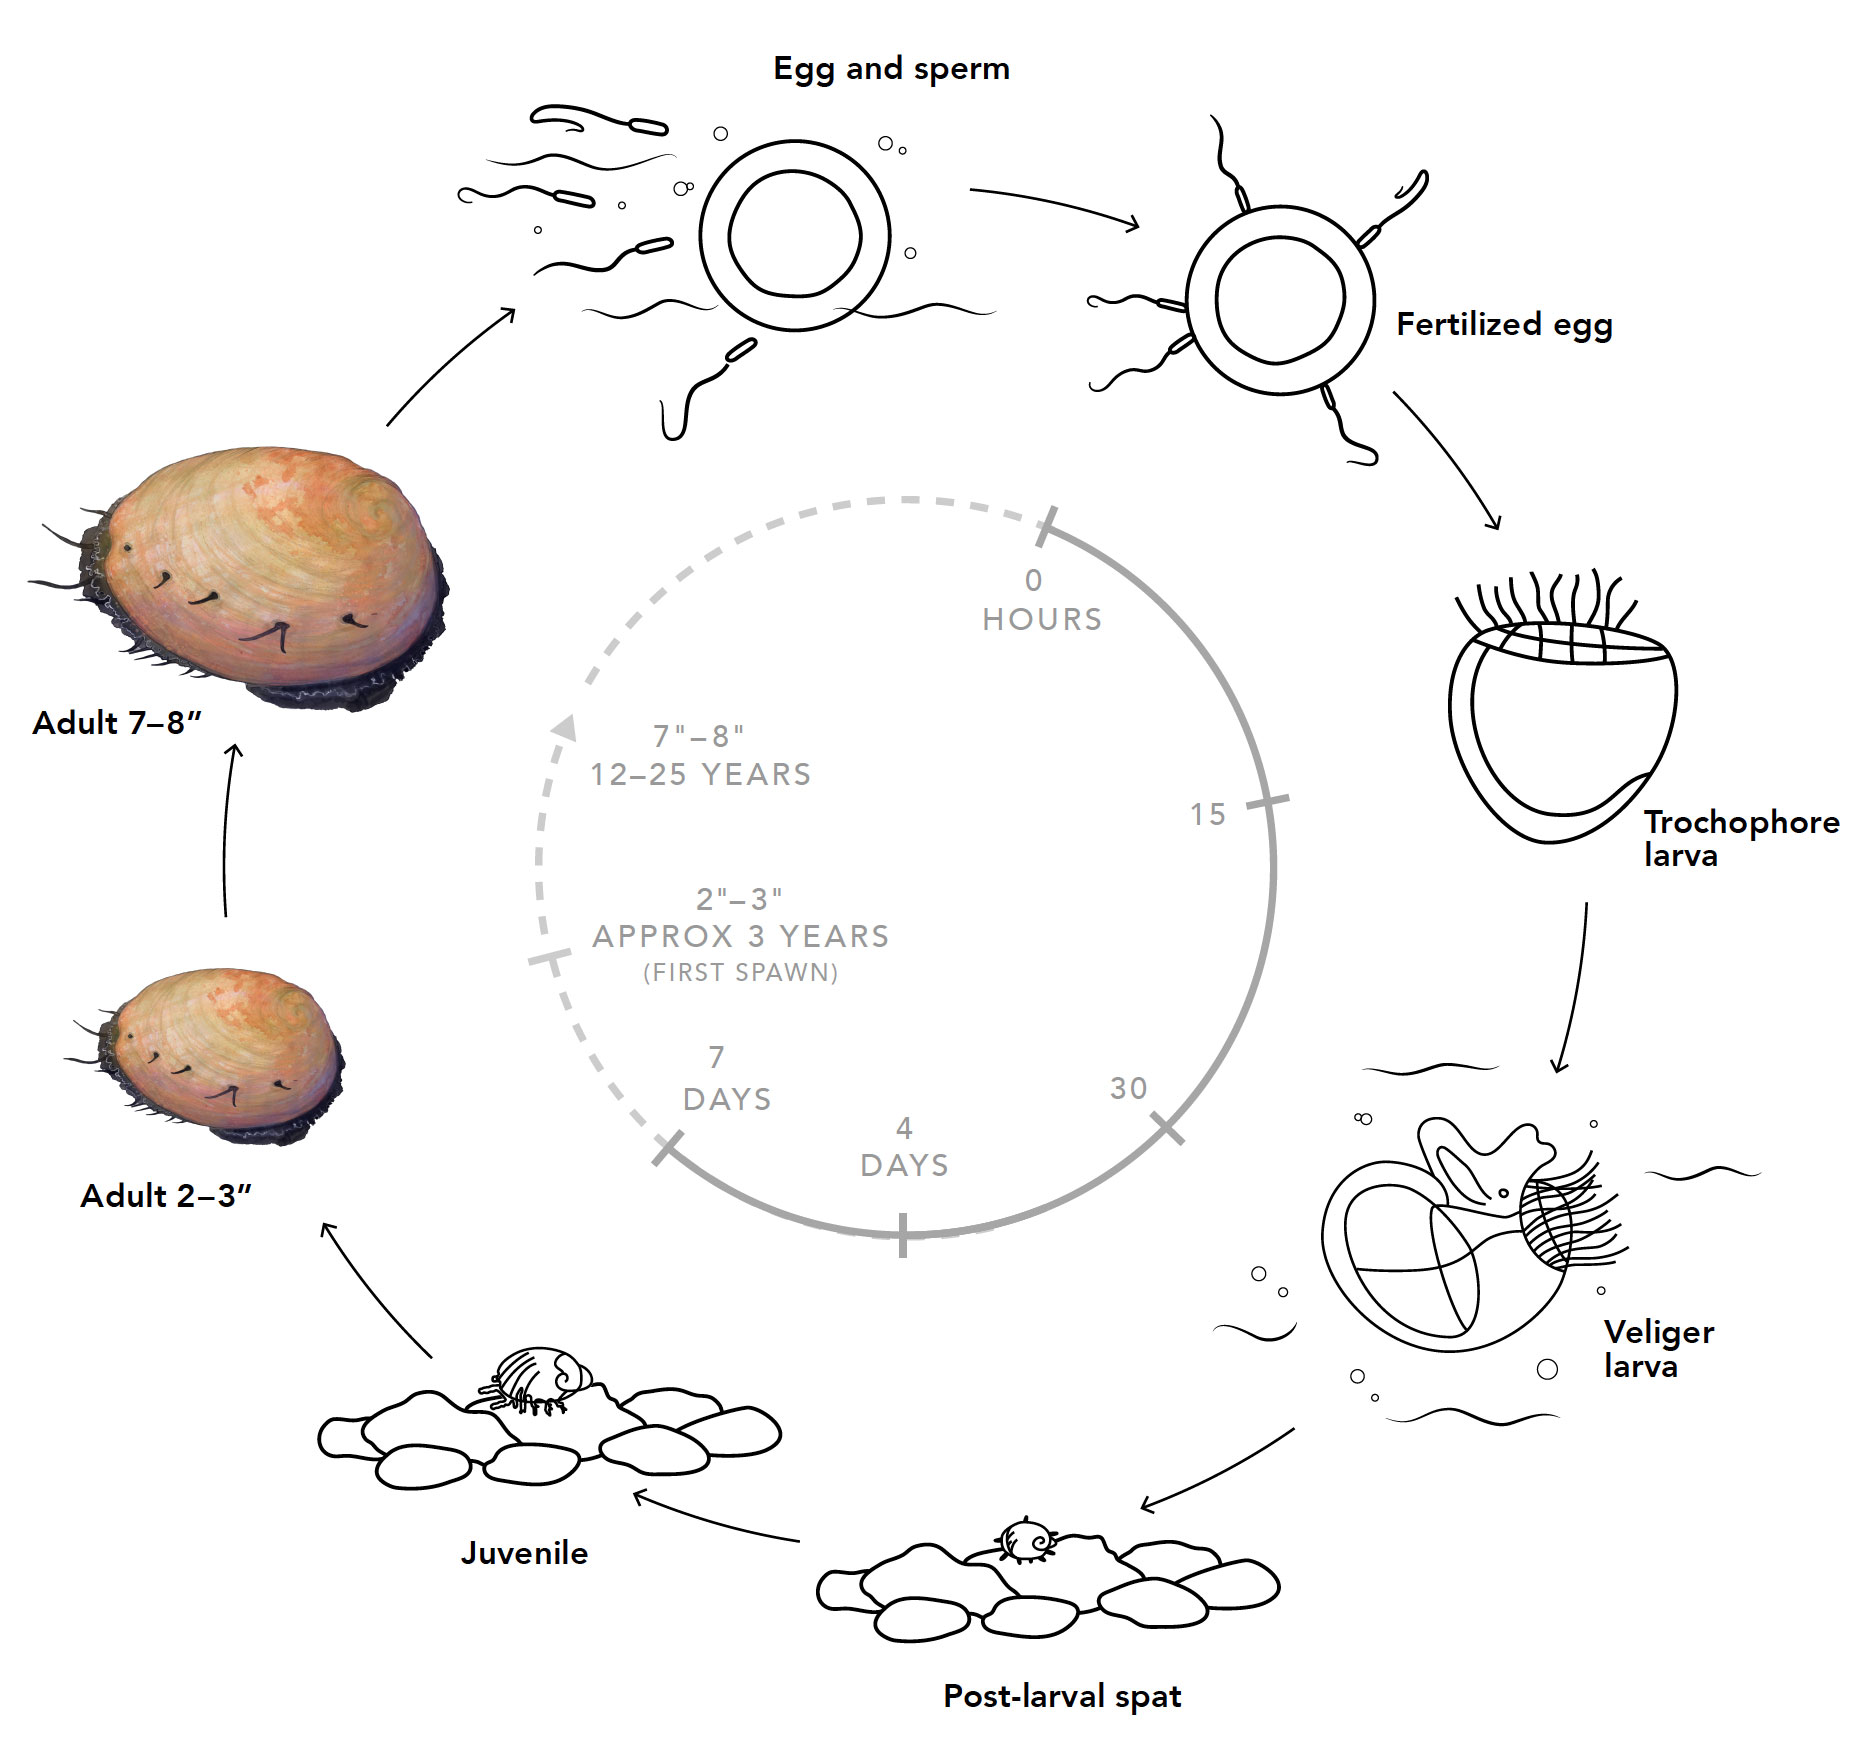 Diagram showing reproduction cycle of Haliotis